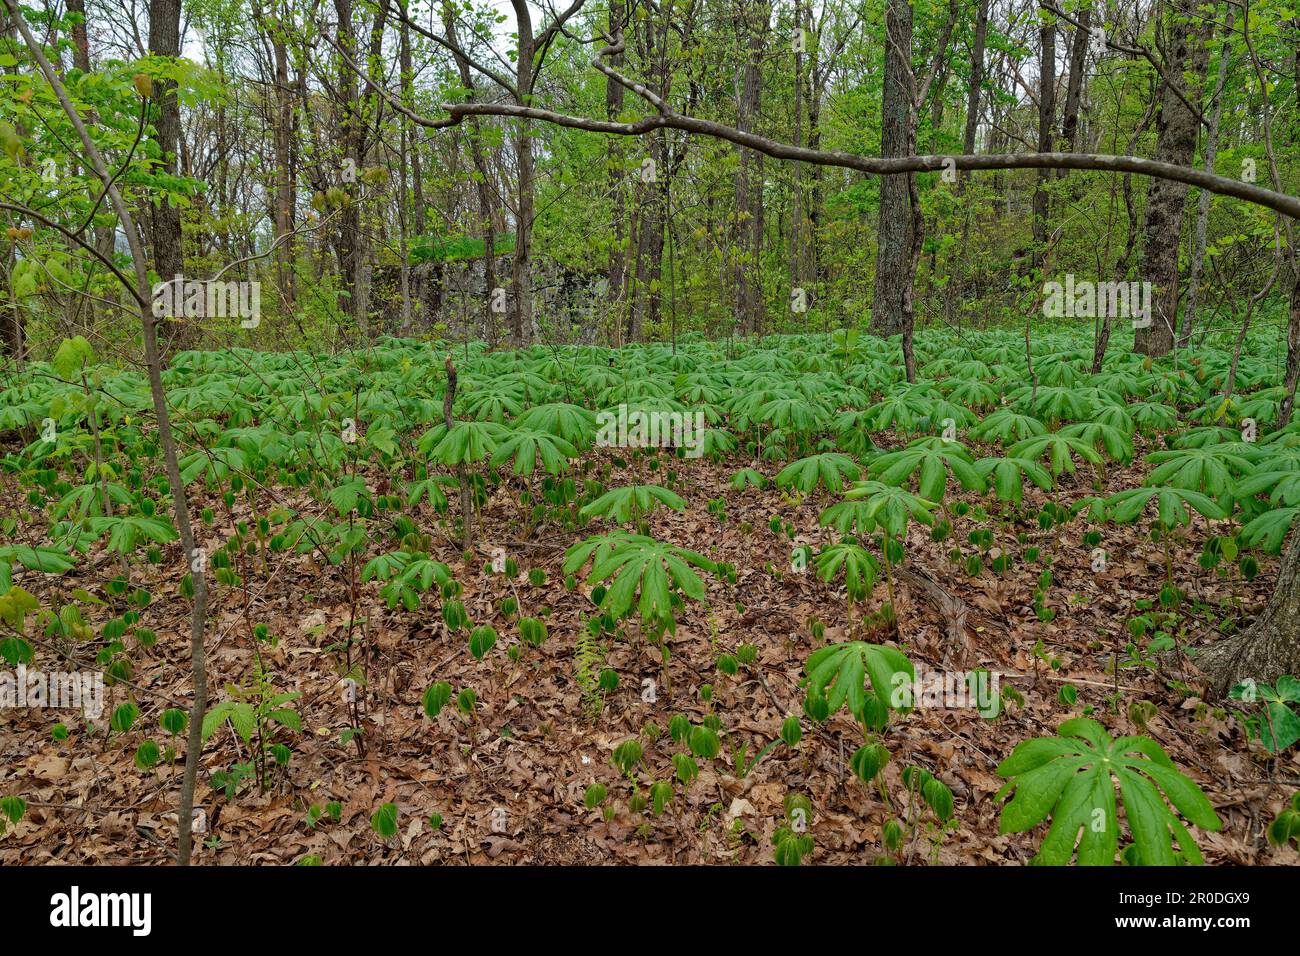 Area in the forest full of mayapple plants starting to rise and open covering the woodland ground of fallen leaves with a large boulder in the backgro Stock Photo